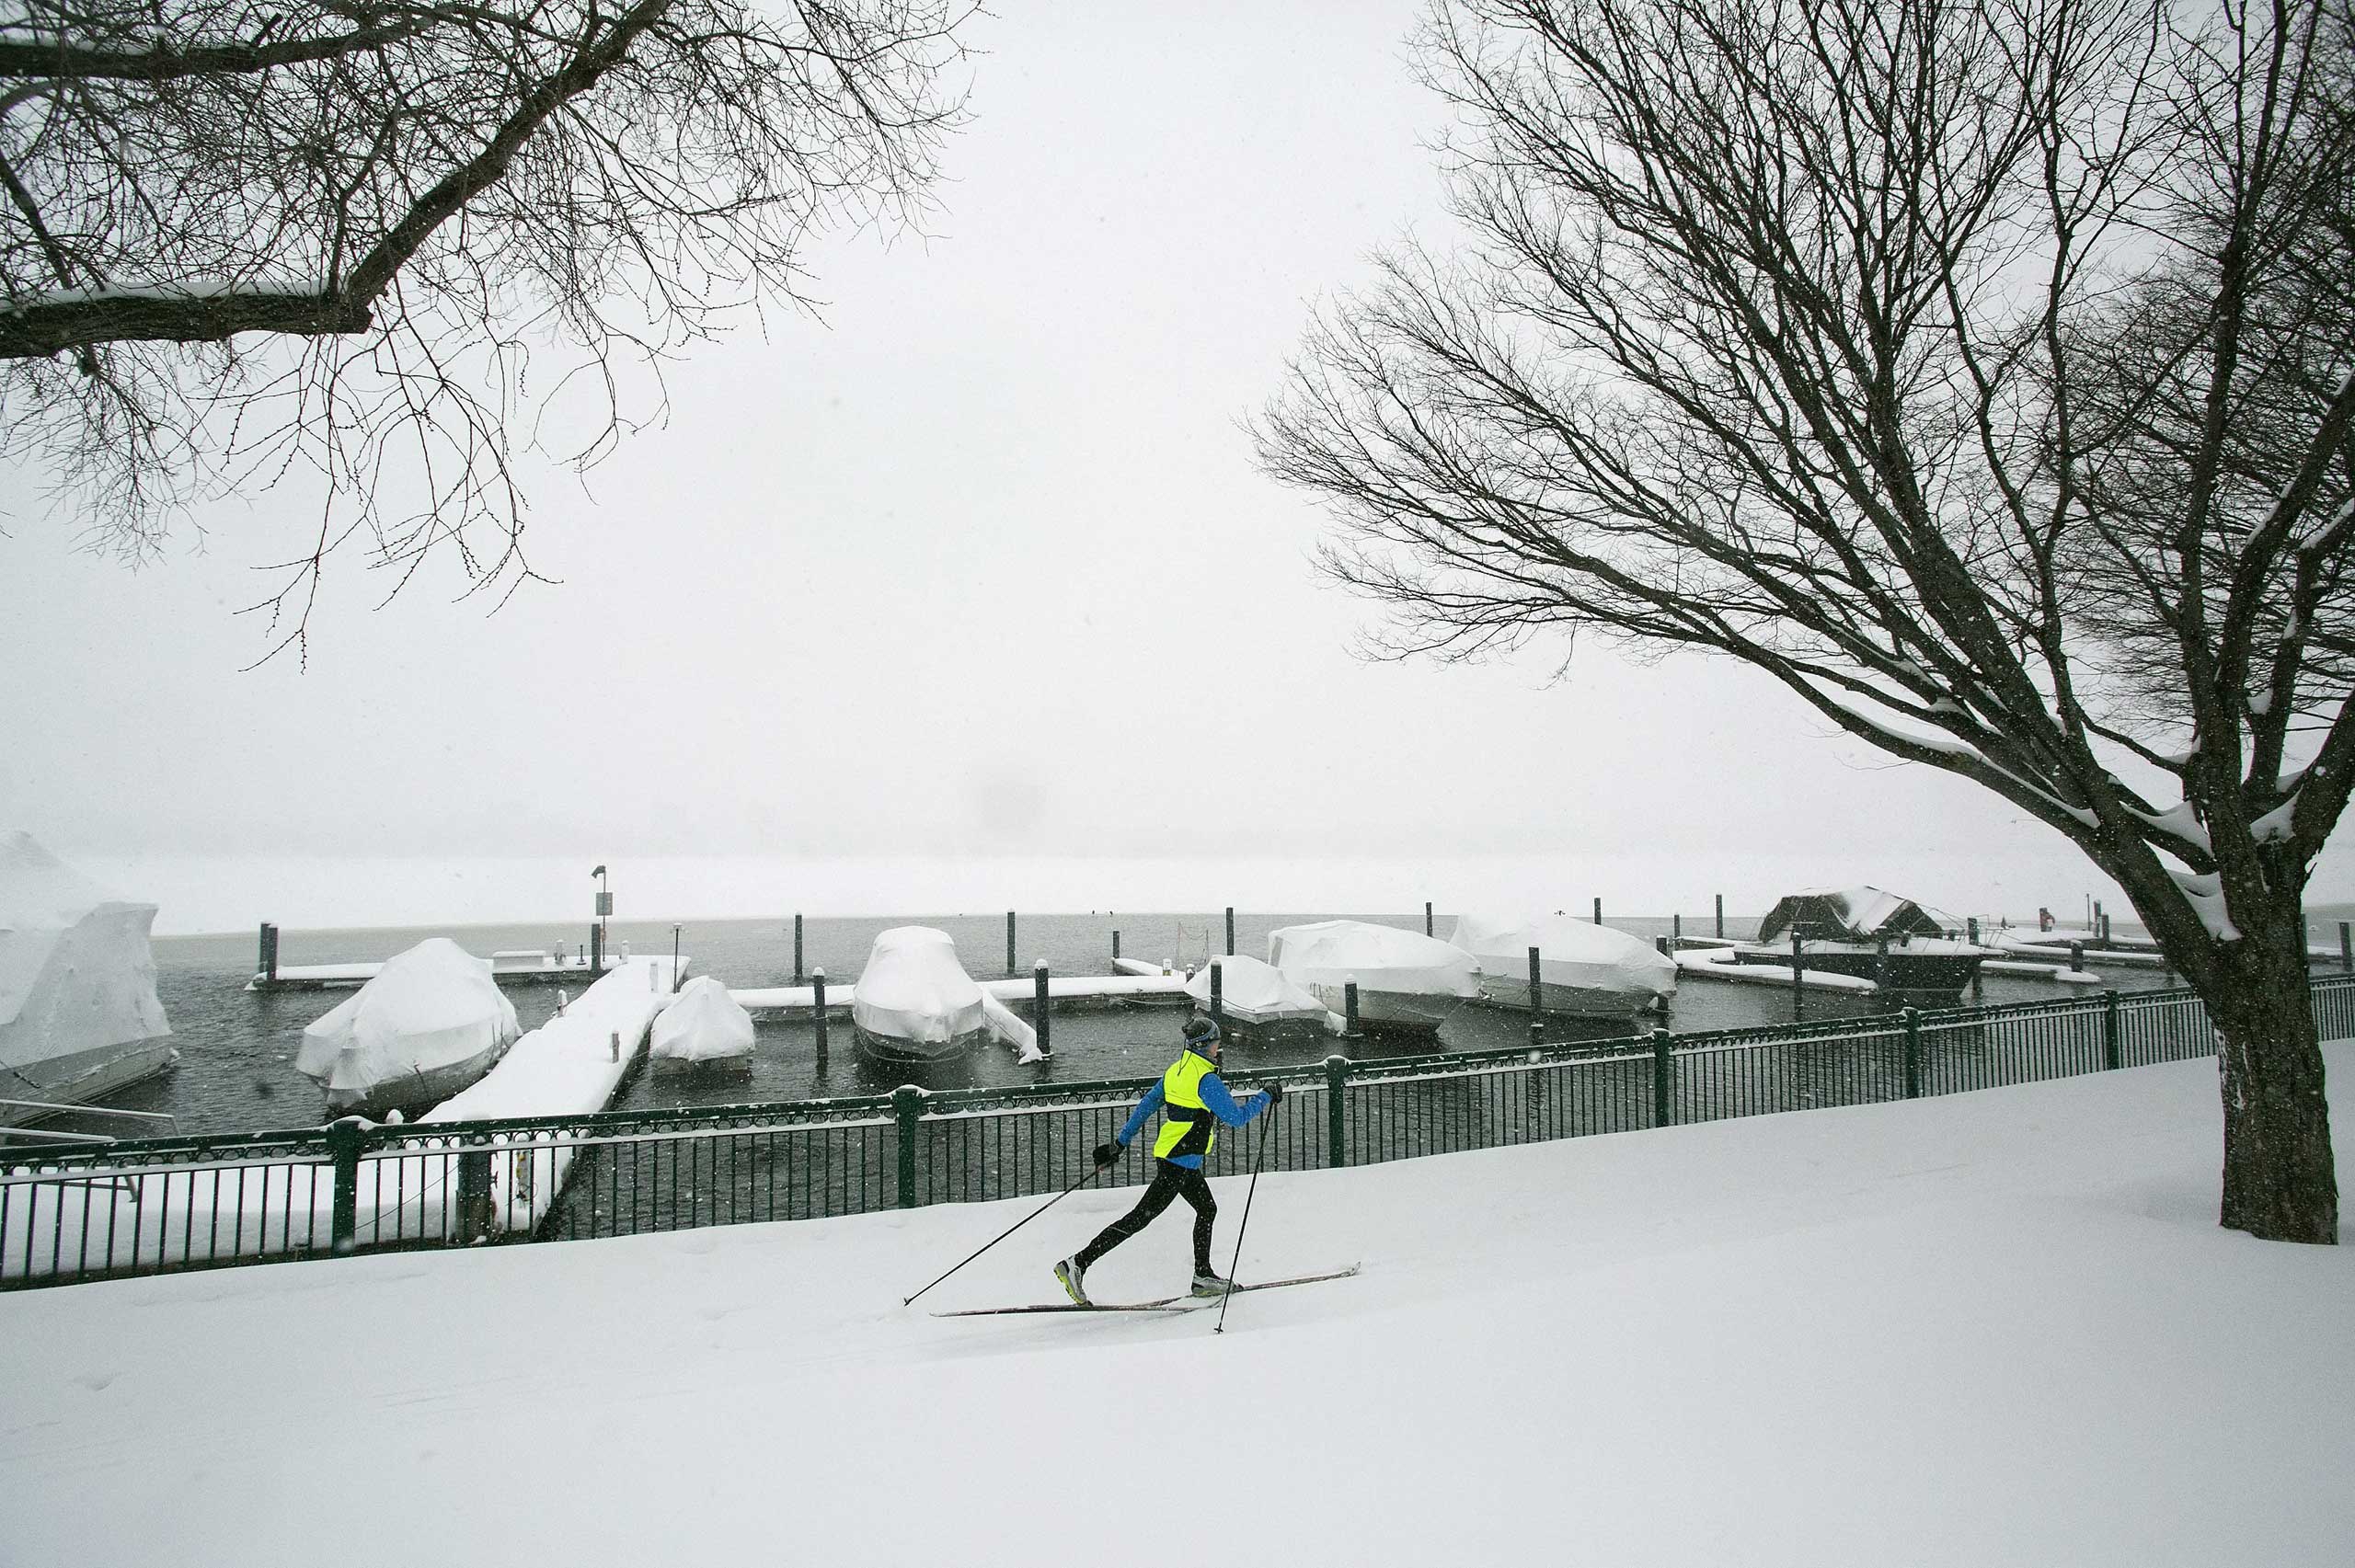 A cross-country skier goes up a path near the Charles River in Cambridge, Mass. on Feb. 9, 2015.